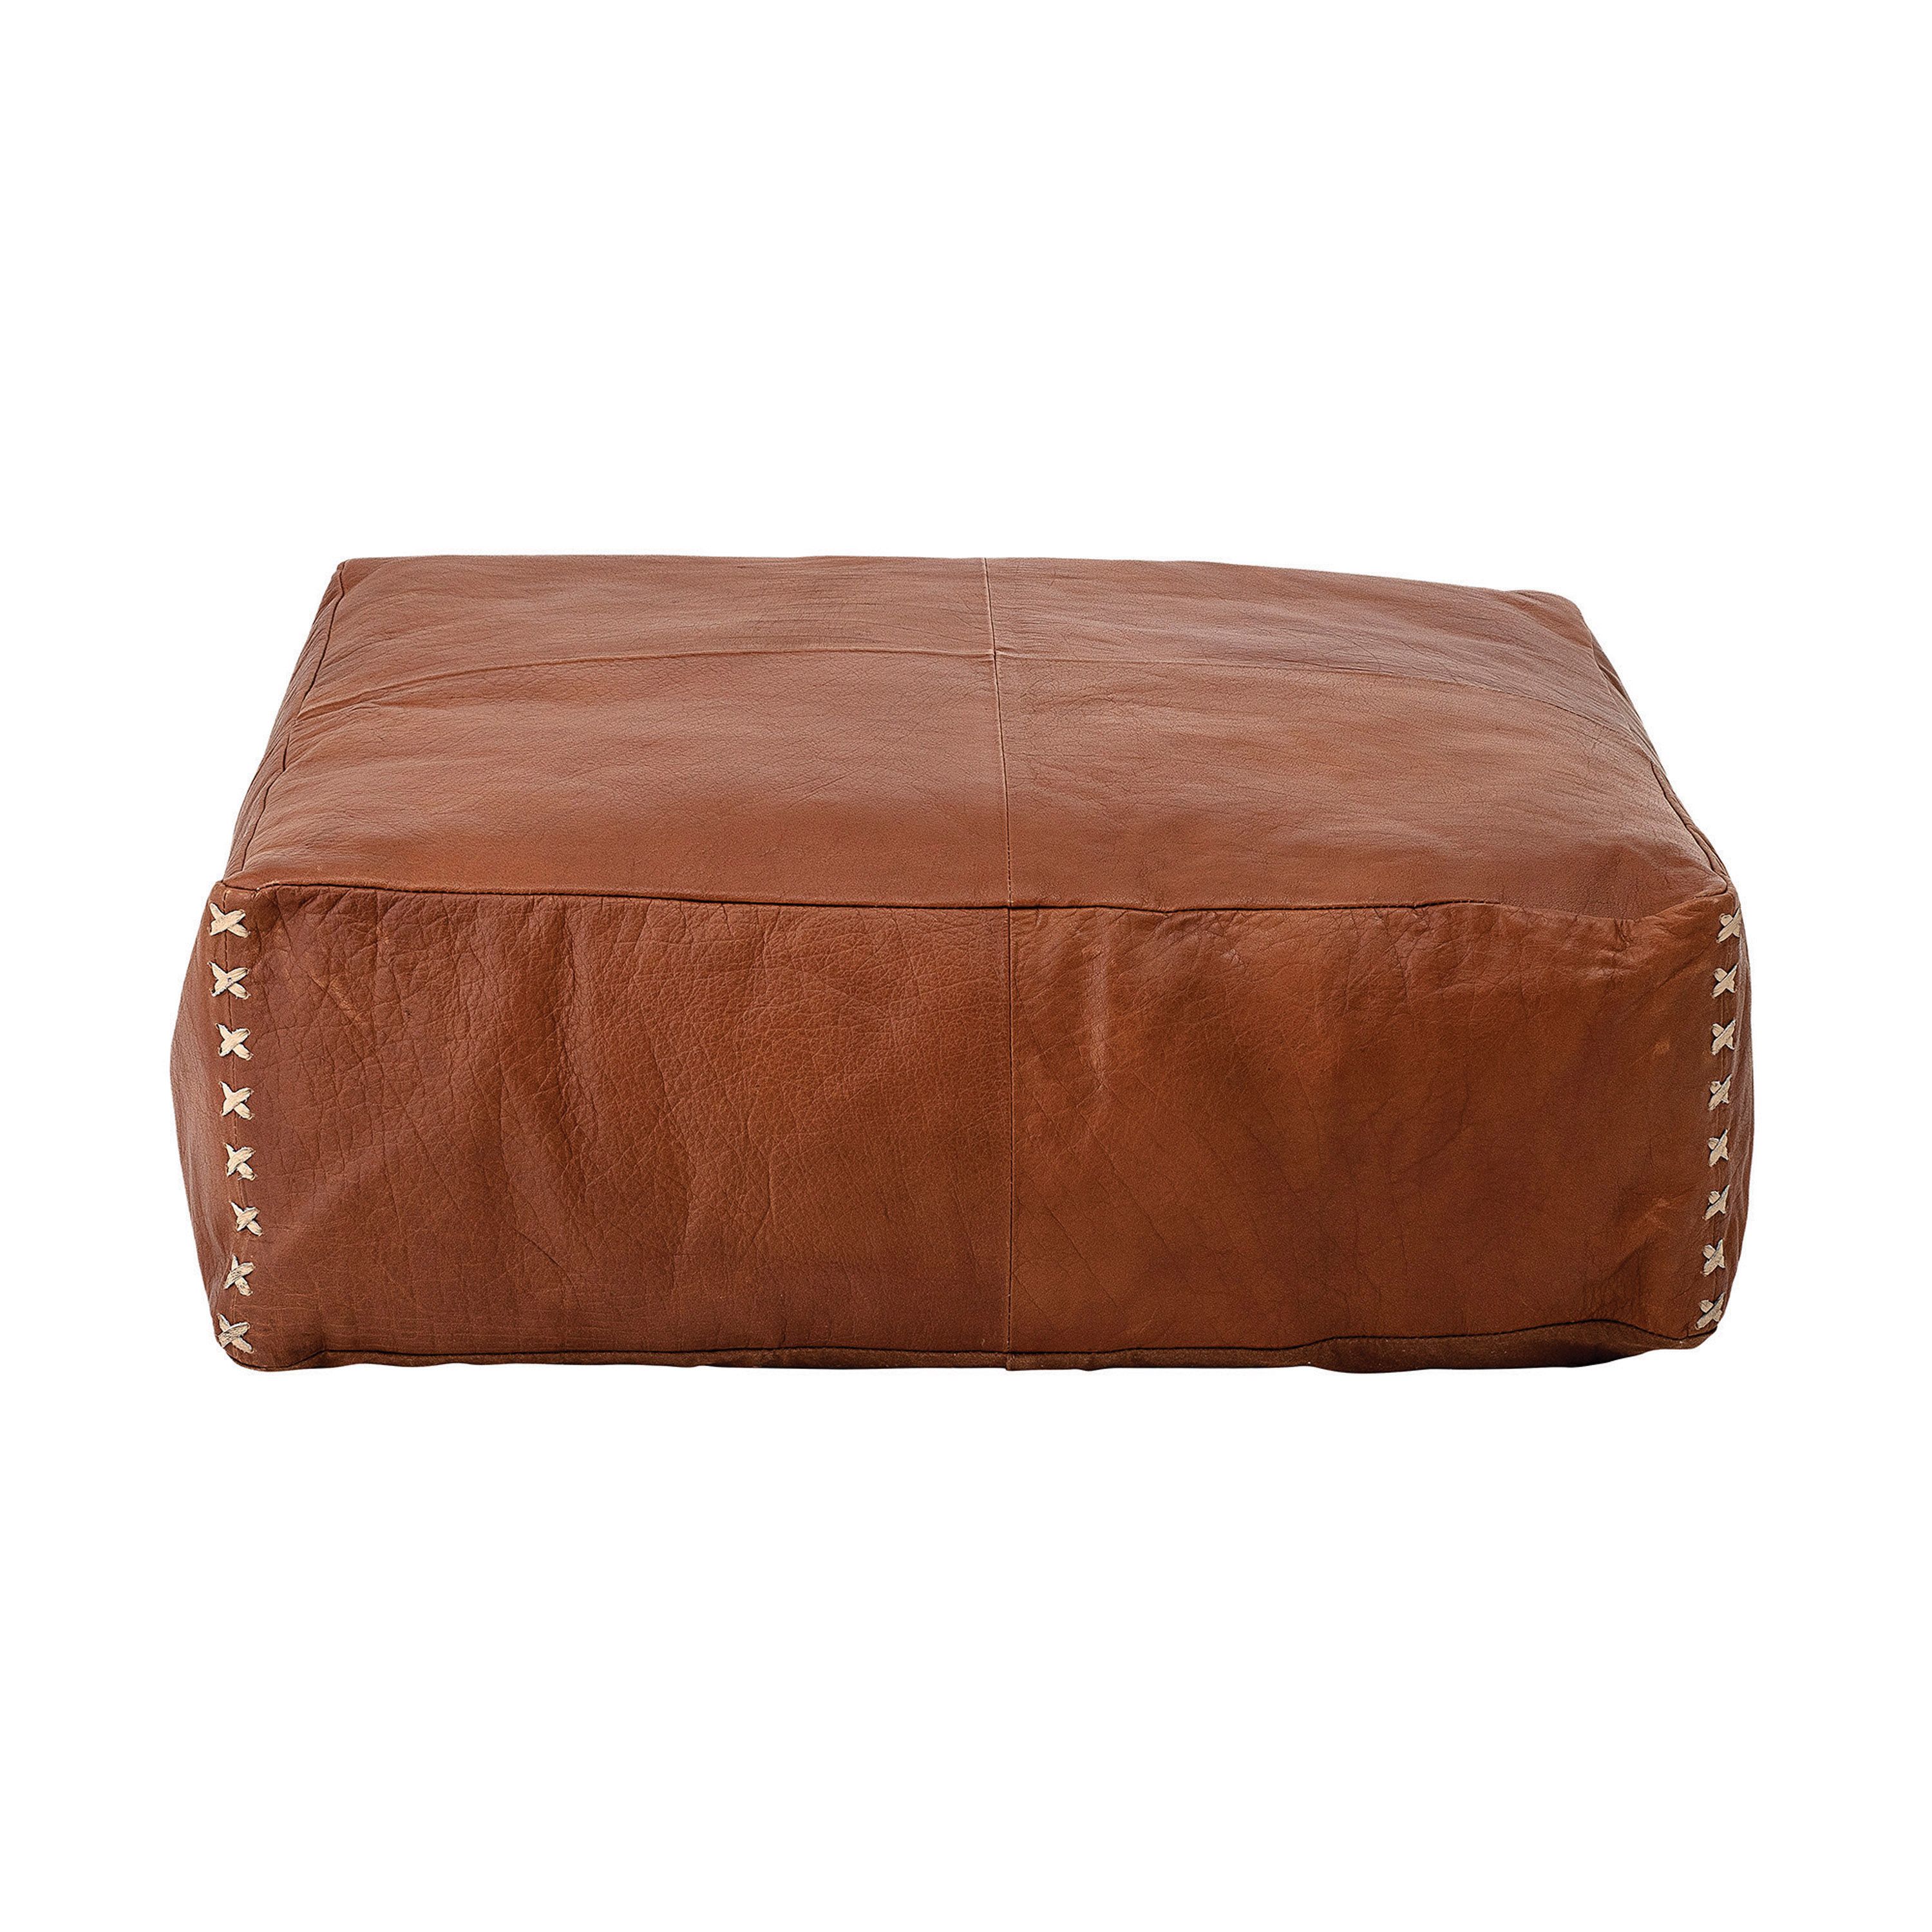 Tobacco Brown Leather Pouf with Off-White Stitch Detail